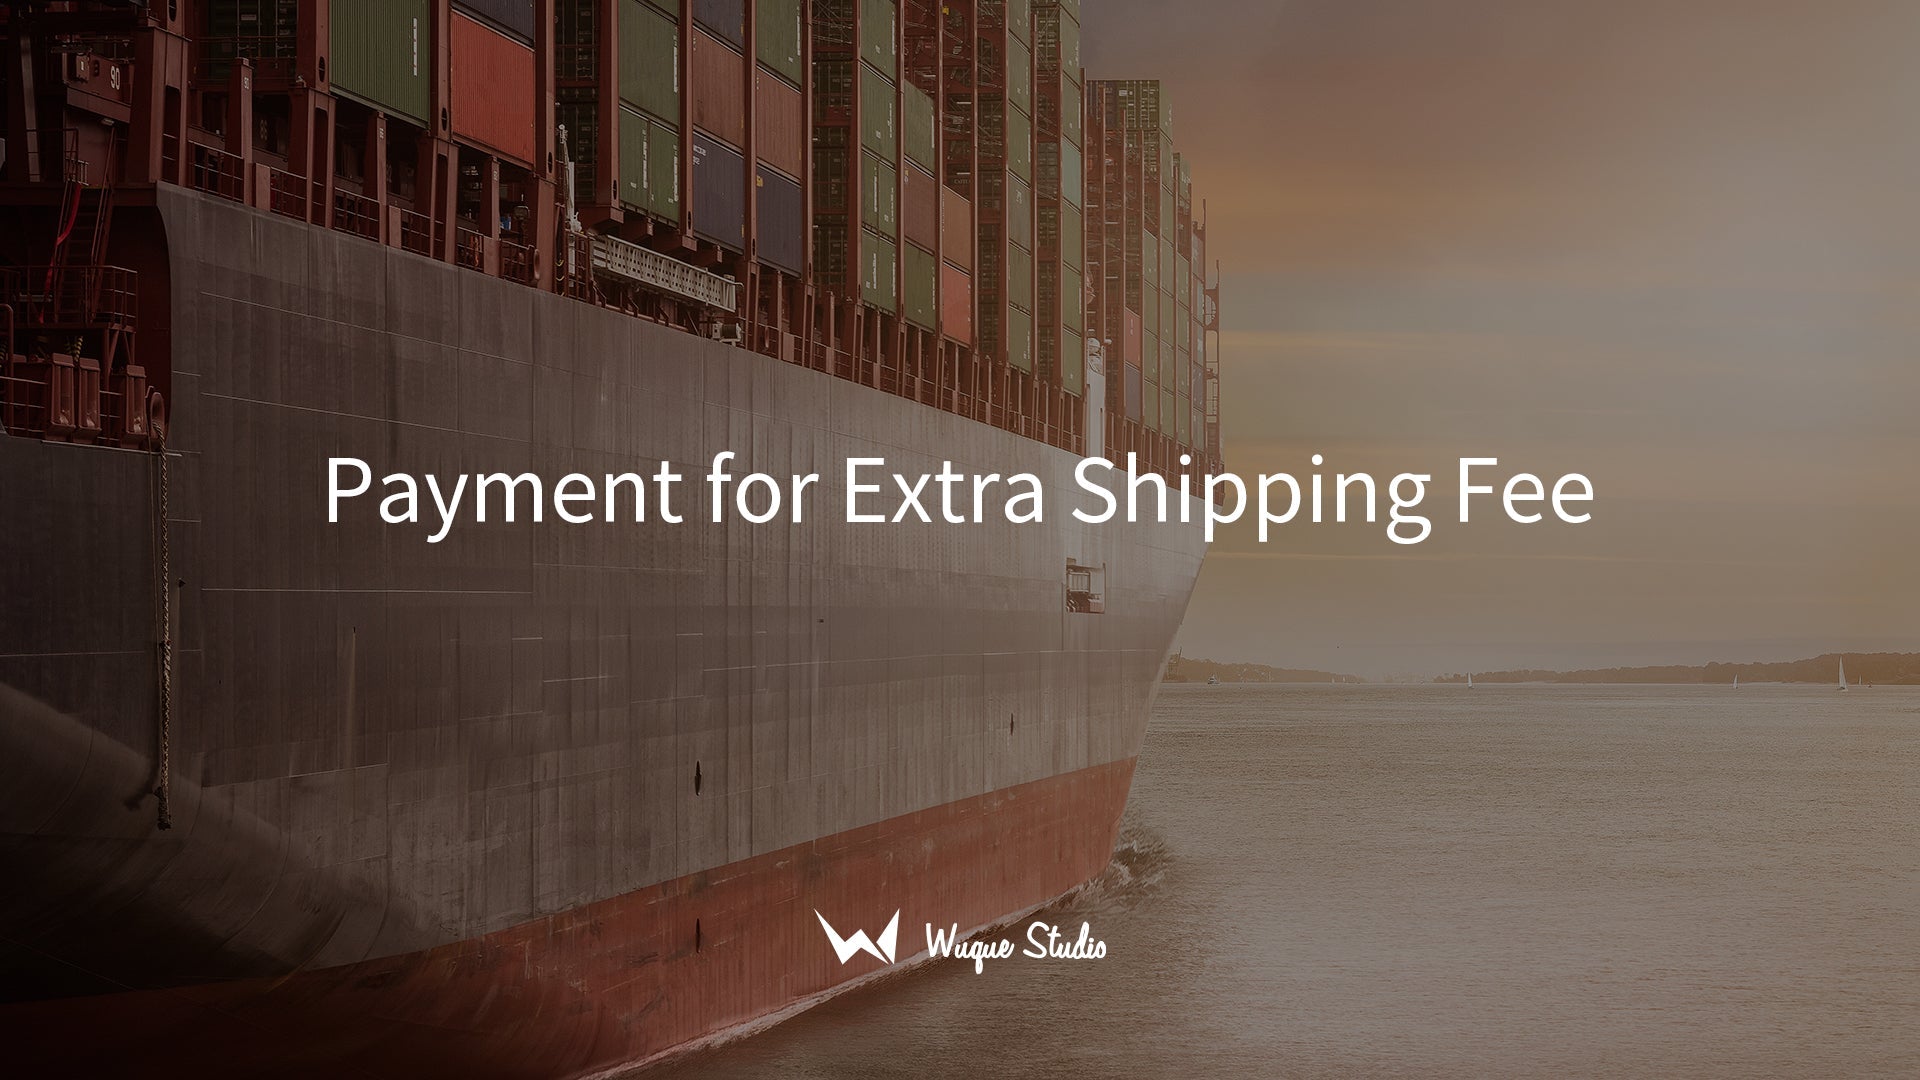 Payment for Shipping Fee – Wuque Studio